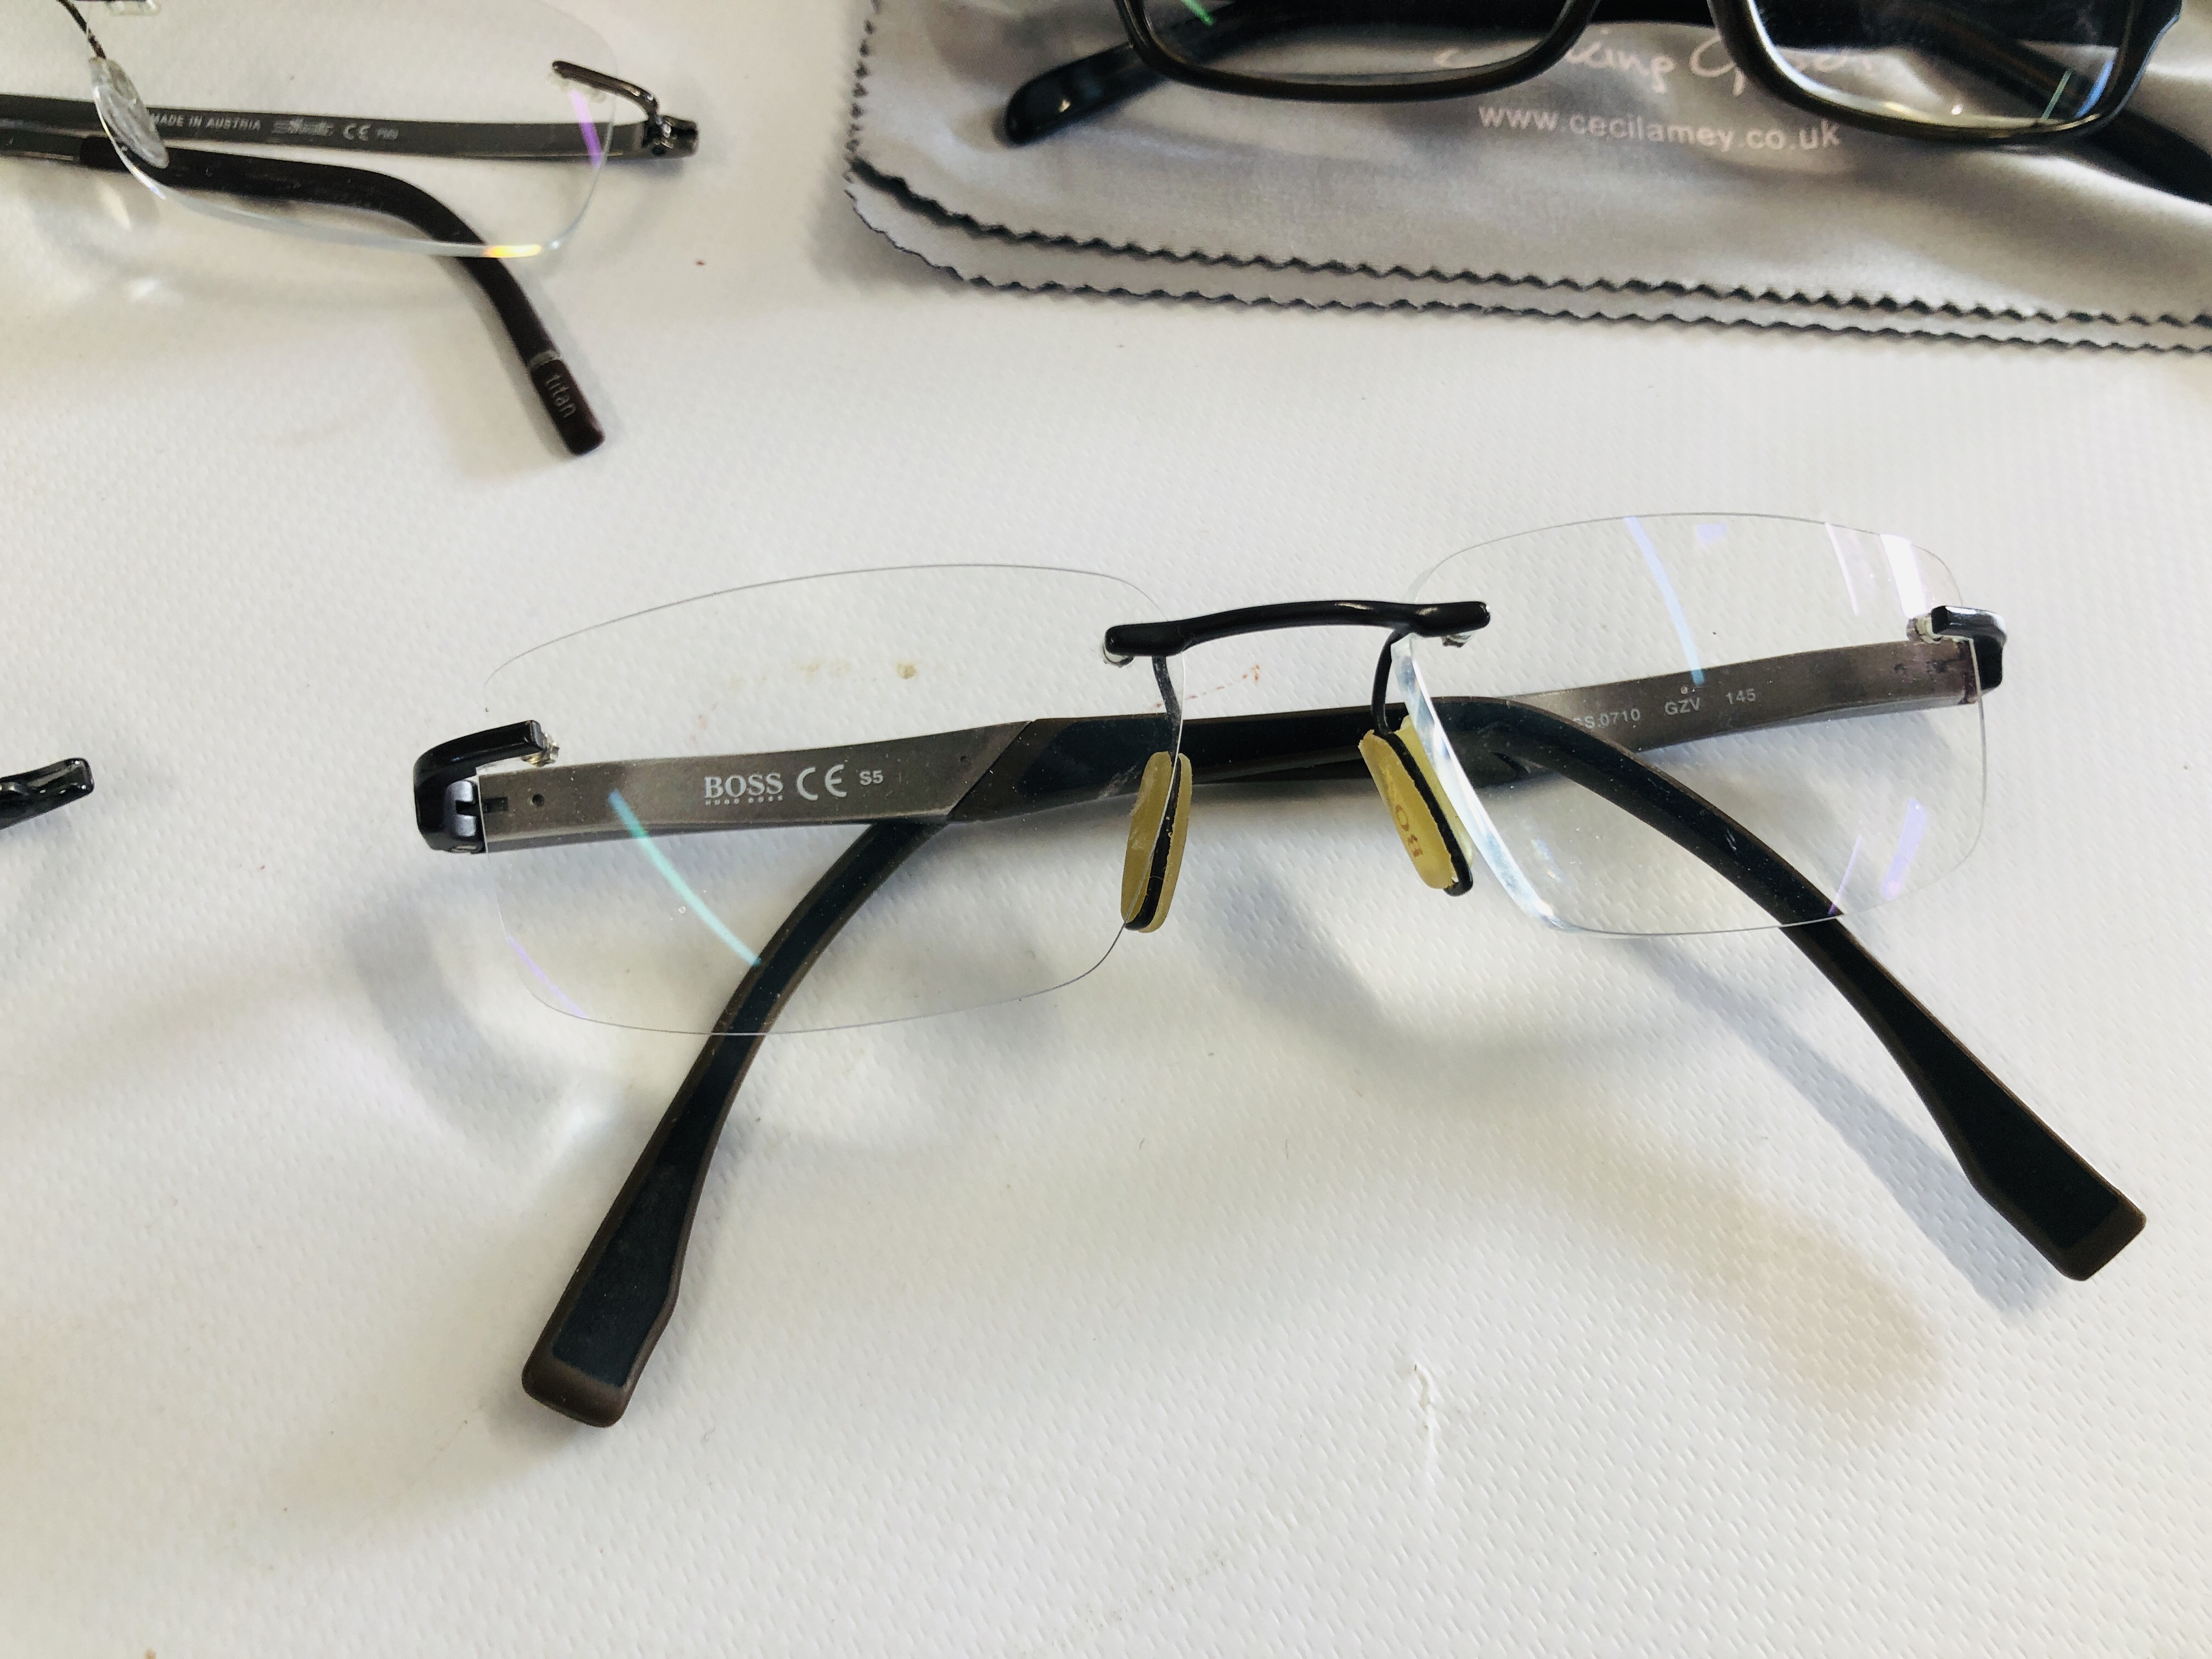 6 PAIRS OF DESIGNER FRAMED PRESCRIPTION READING GLASSES TO INCLUDE GUCCI, HUGO BOSS, SILHOUETTE. - Image 6 of 7